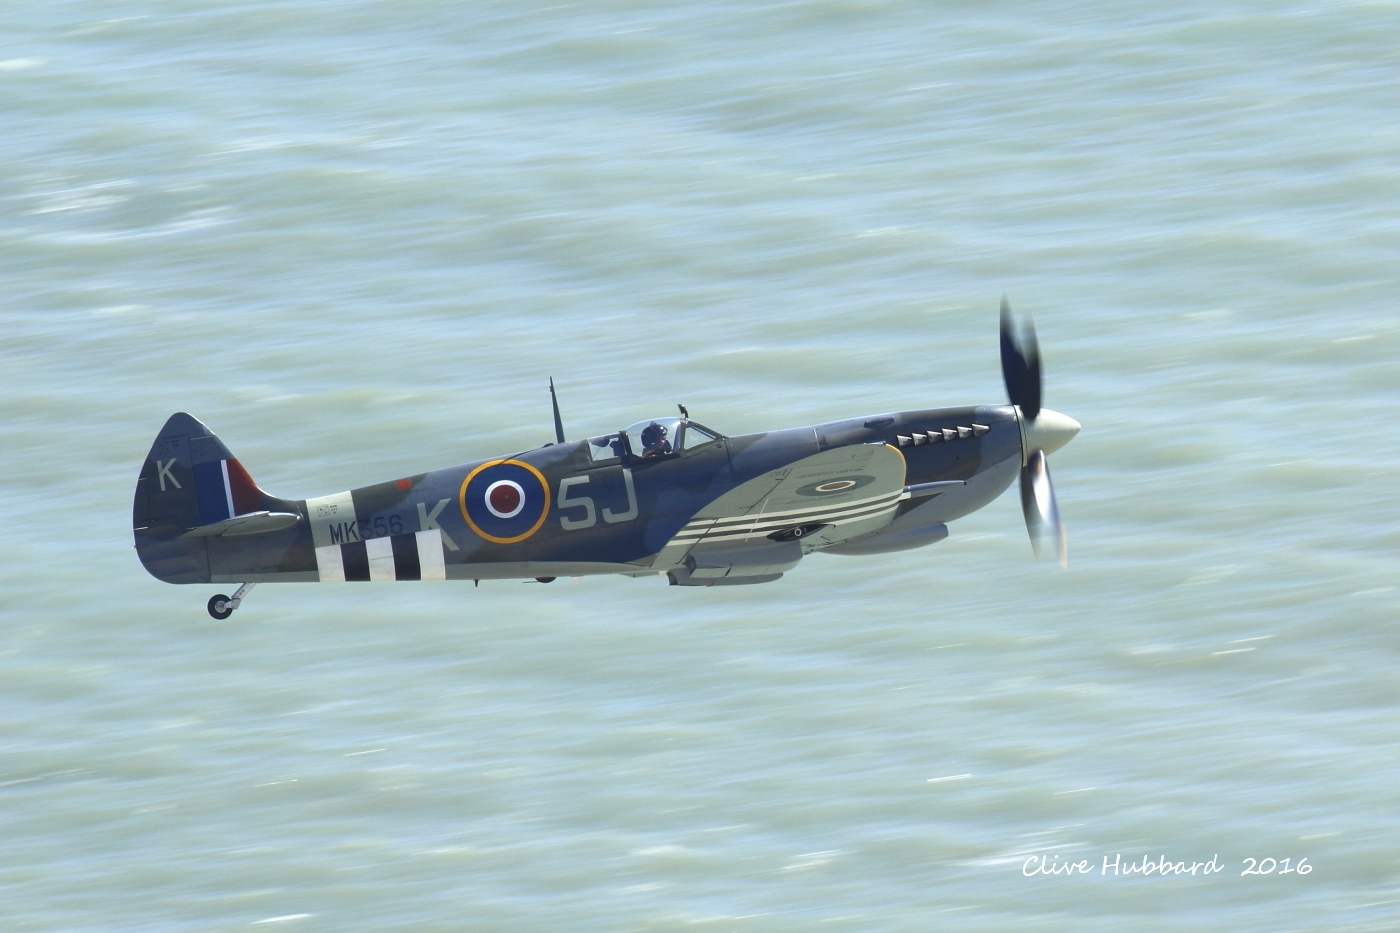 Spitfire MK LFiXe from Beachy Head 2016